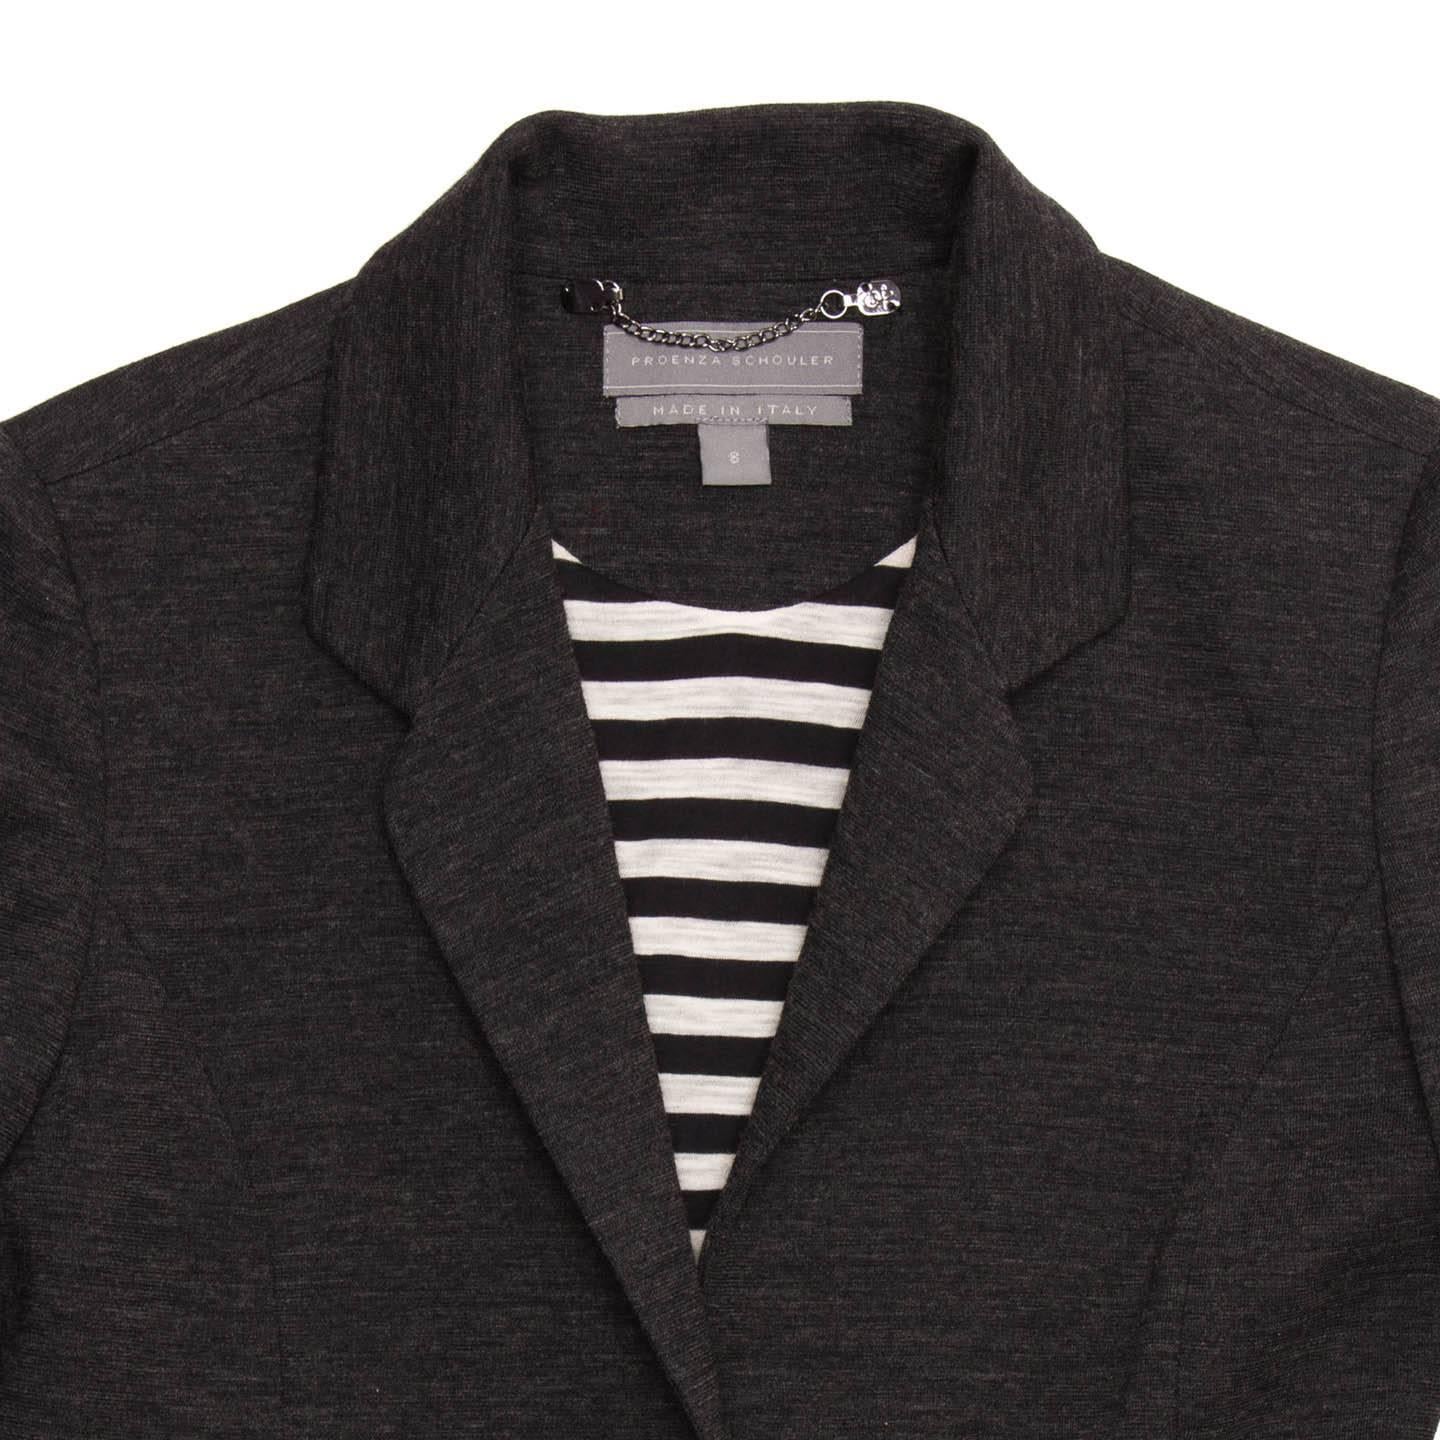 Proenza Schouler Charcoal Grey Blazer In New Condition For Sale In Brooklyn, NY